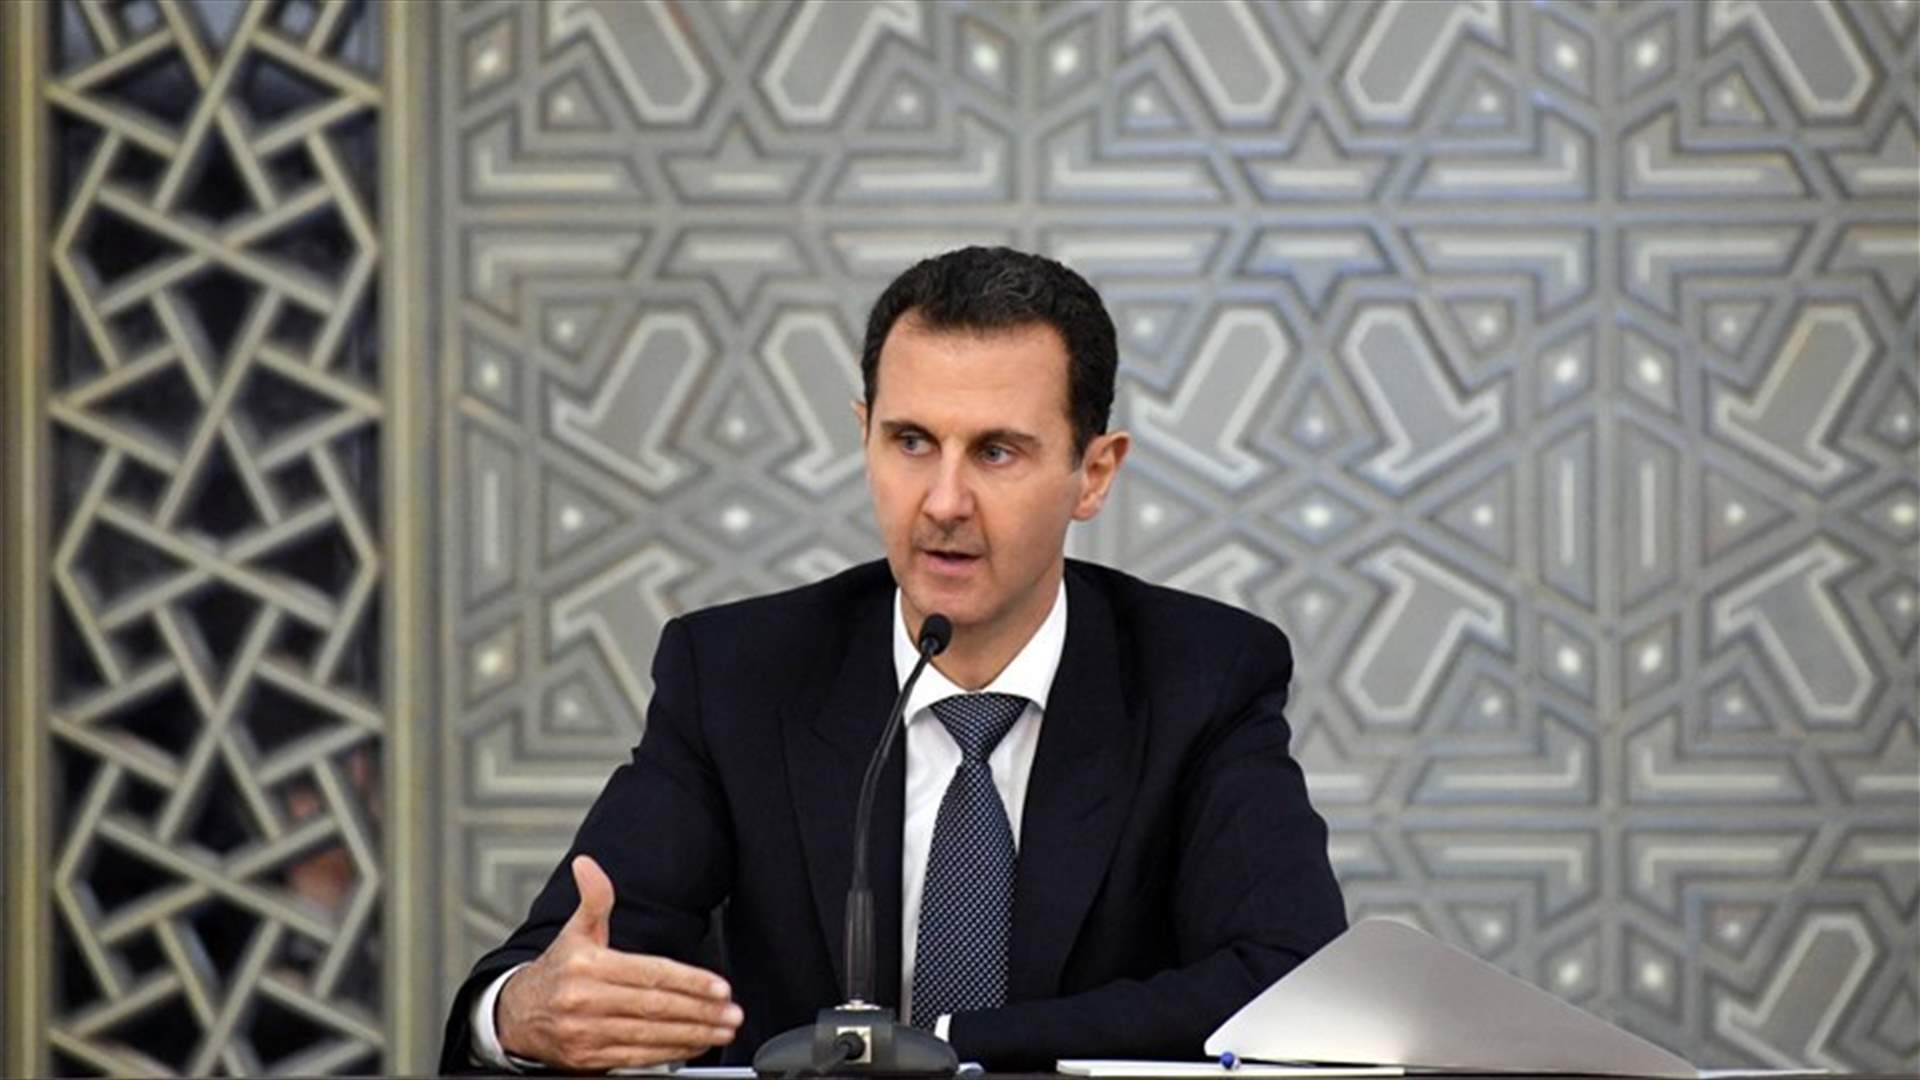 Assad to Aoun: We are keen on boosting connections between both countries